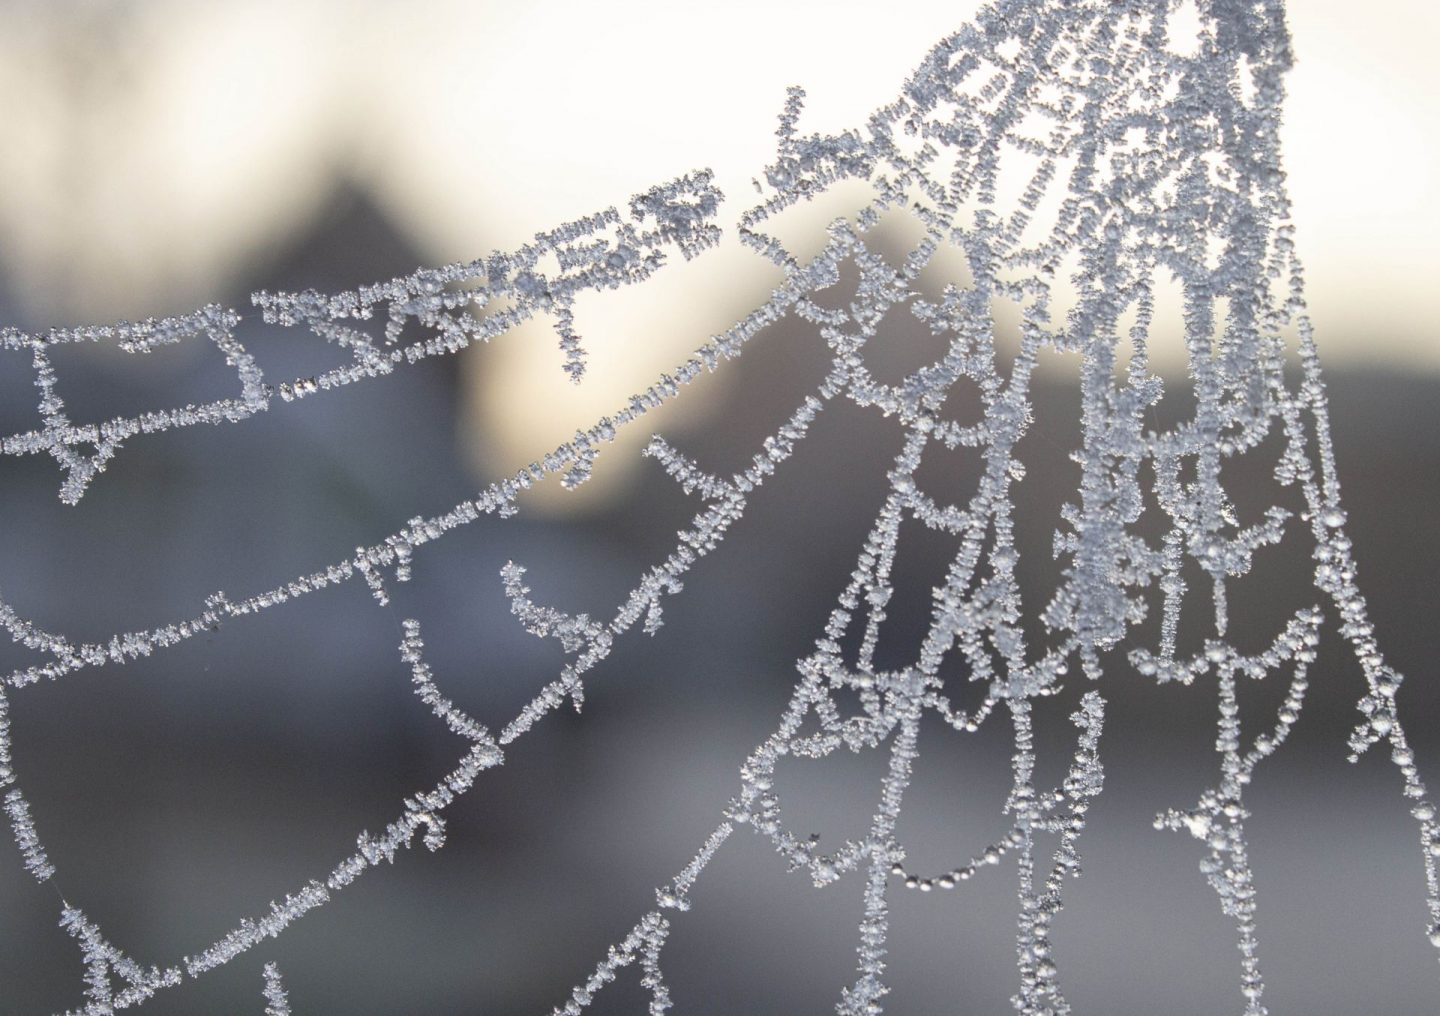 Frost covered spider's web